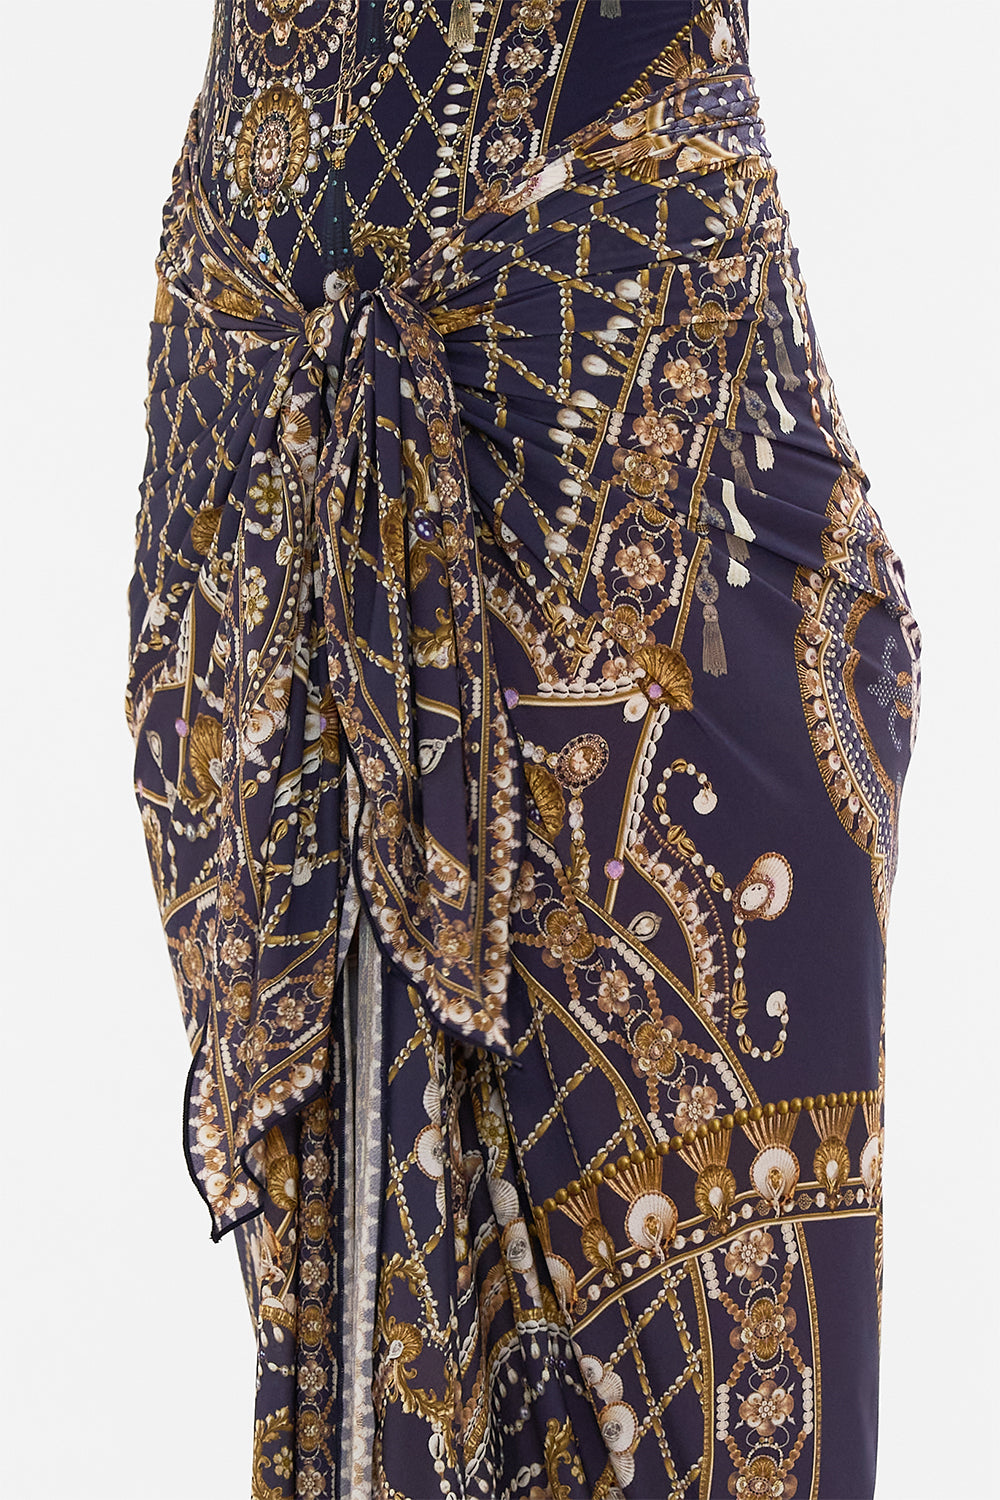 CAMILLA gold/black long sarong in Dance with the Duke